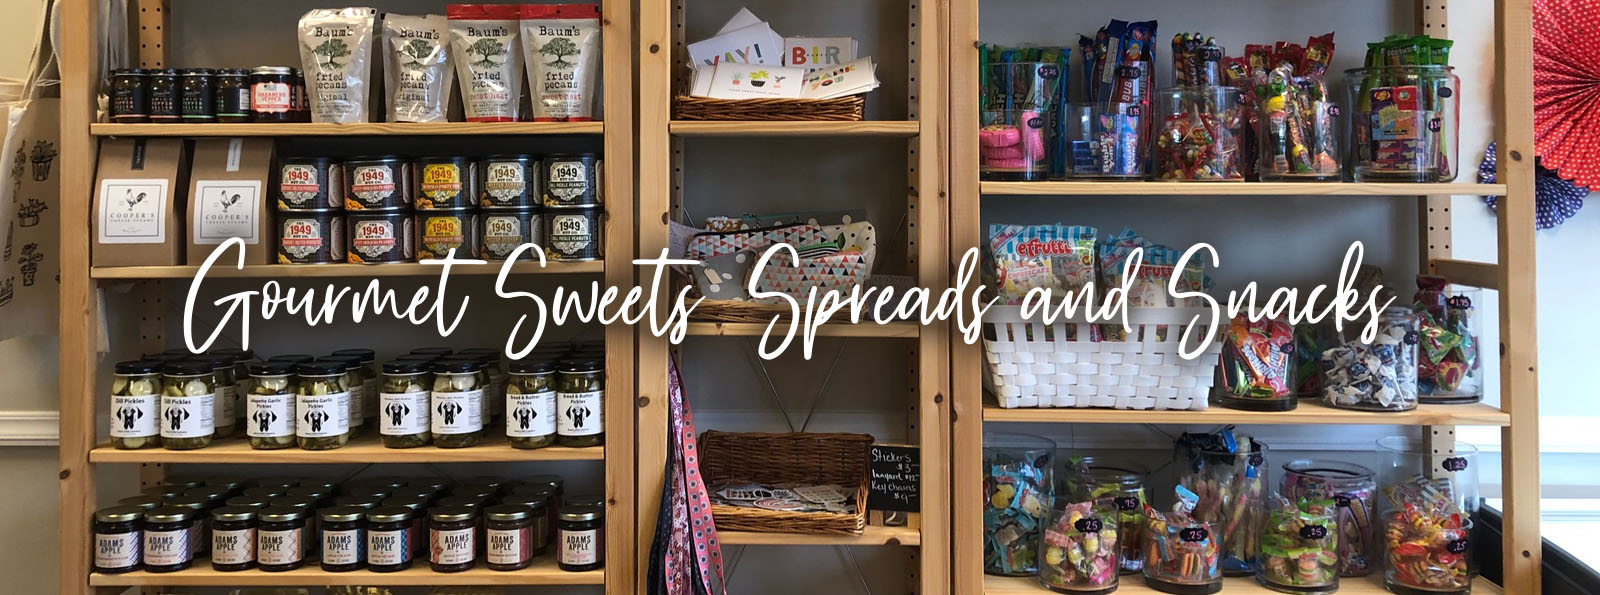 Gourmet Retail Goods, Snacks, Spreads, Sweets